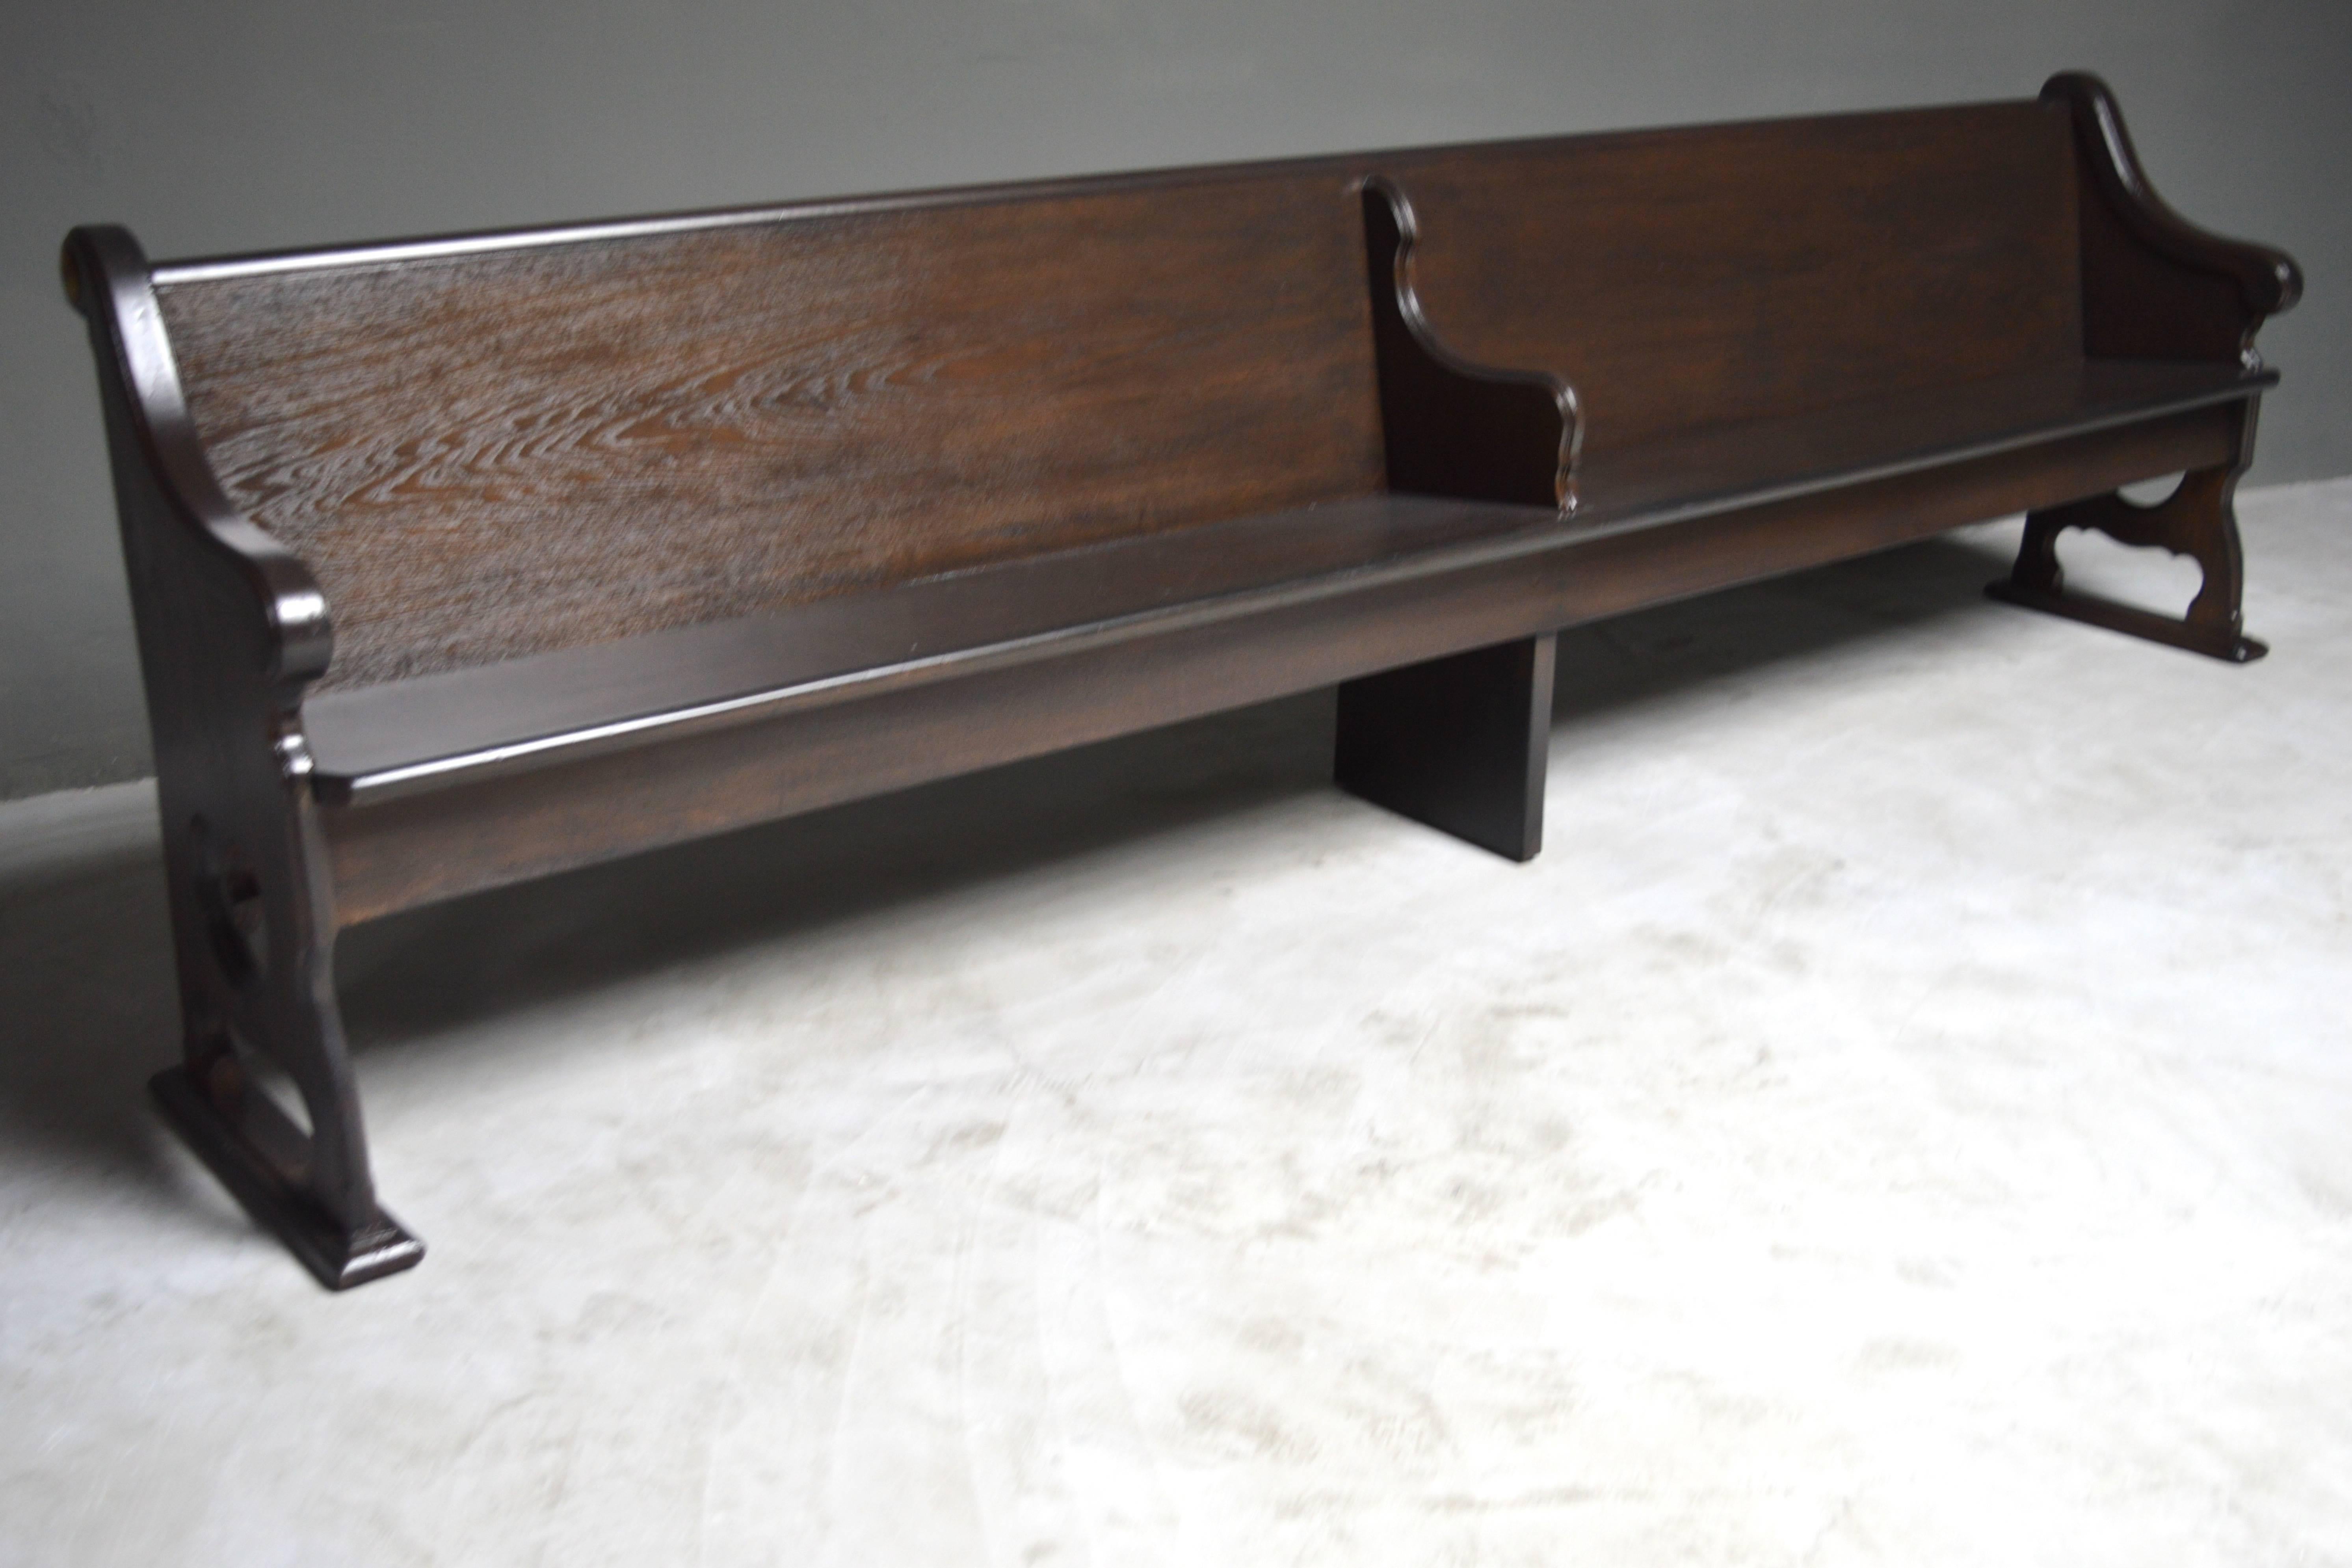 Massive 10 foot long church bench. Newly refinished in a light ebony. Extremely sturdy and substantial piece. Bench features center divider and arm rests on both ends. There is a brass disc on each side of the bench labeled 